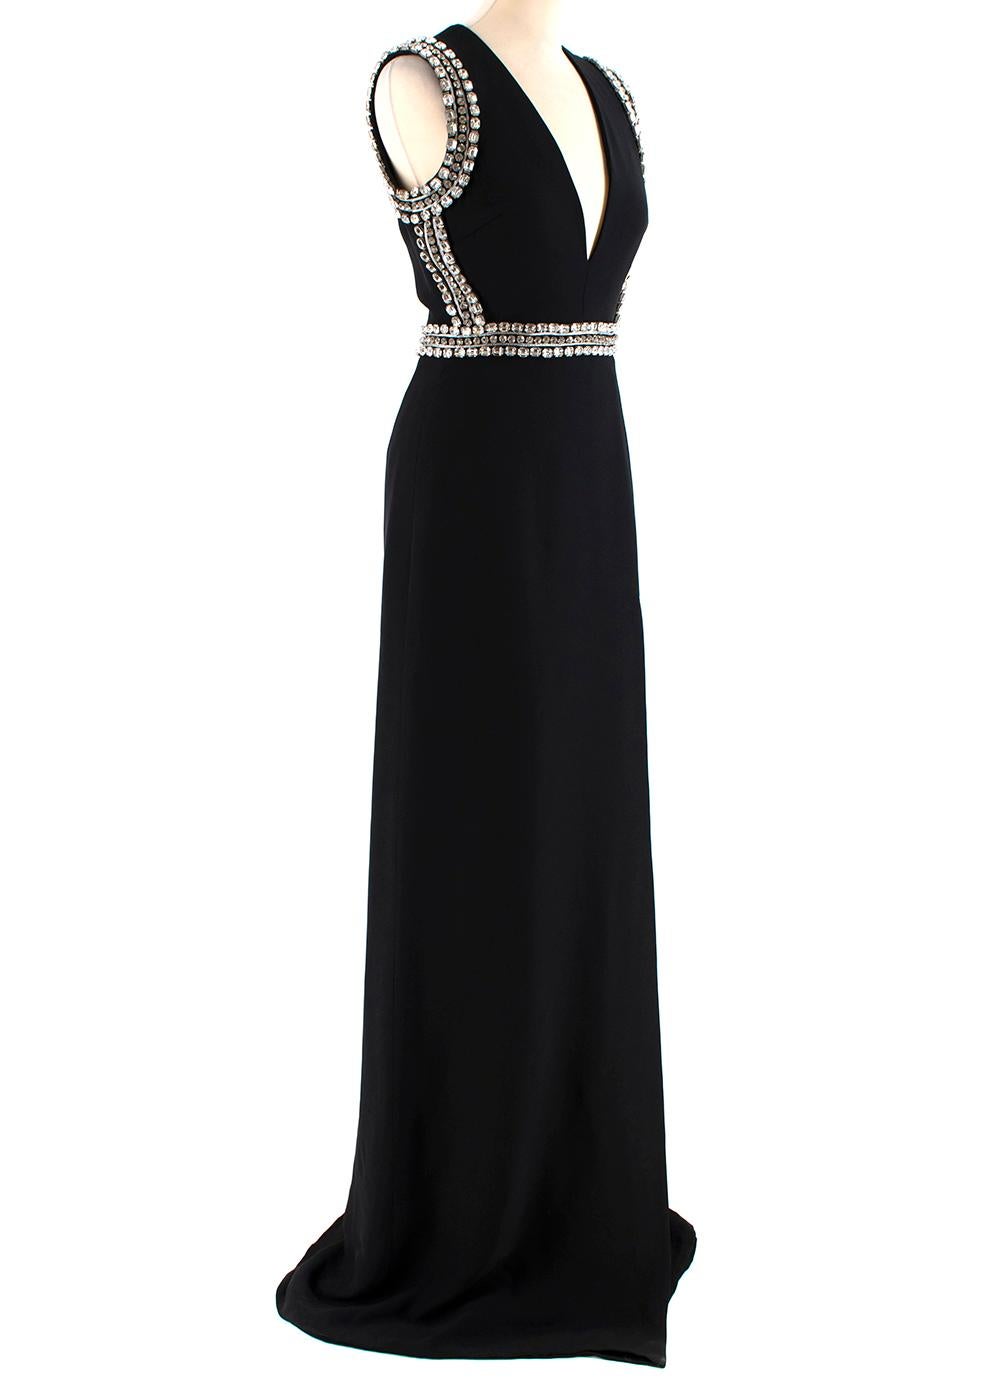 Gucci Black Sleeveless Crystal Embellished Gown

- Gown
- Featuring crystal embellishment
- The sleeves and bodice feature silver piping and gem embellishment
- Zip at the back of the garment 

Made in Italy

Measurements are taken with the item